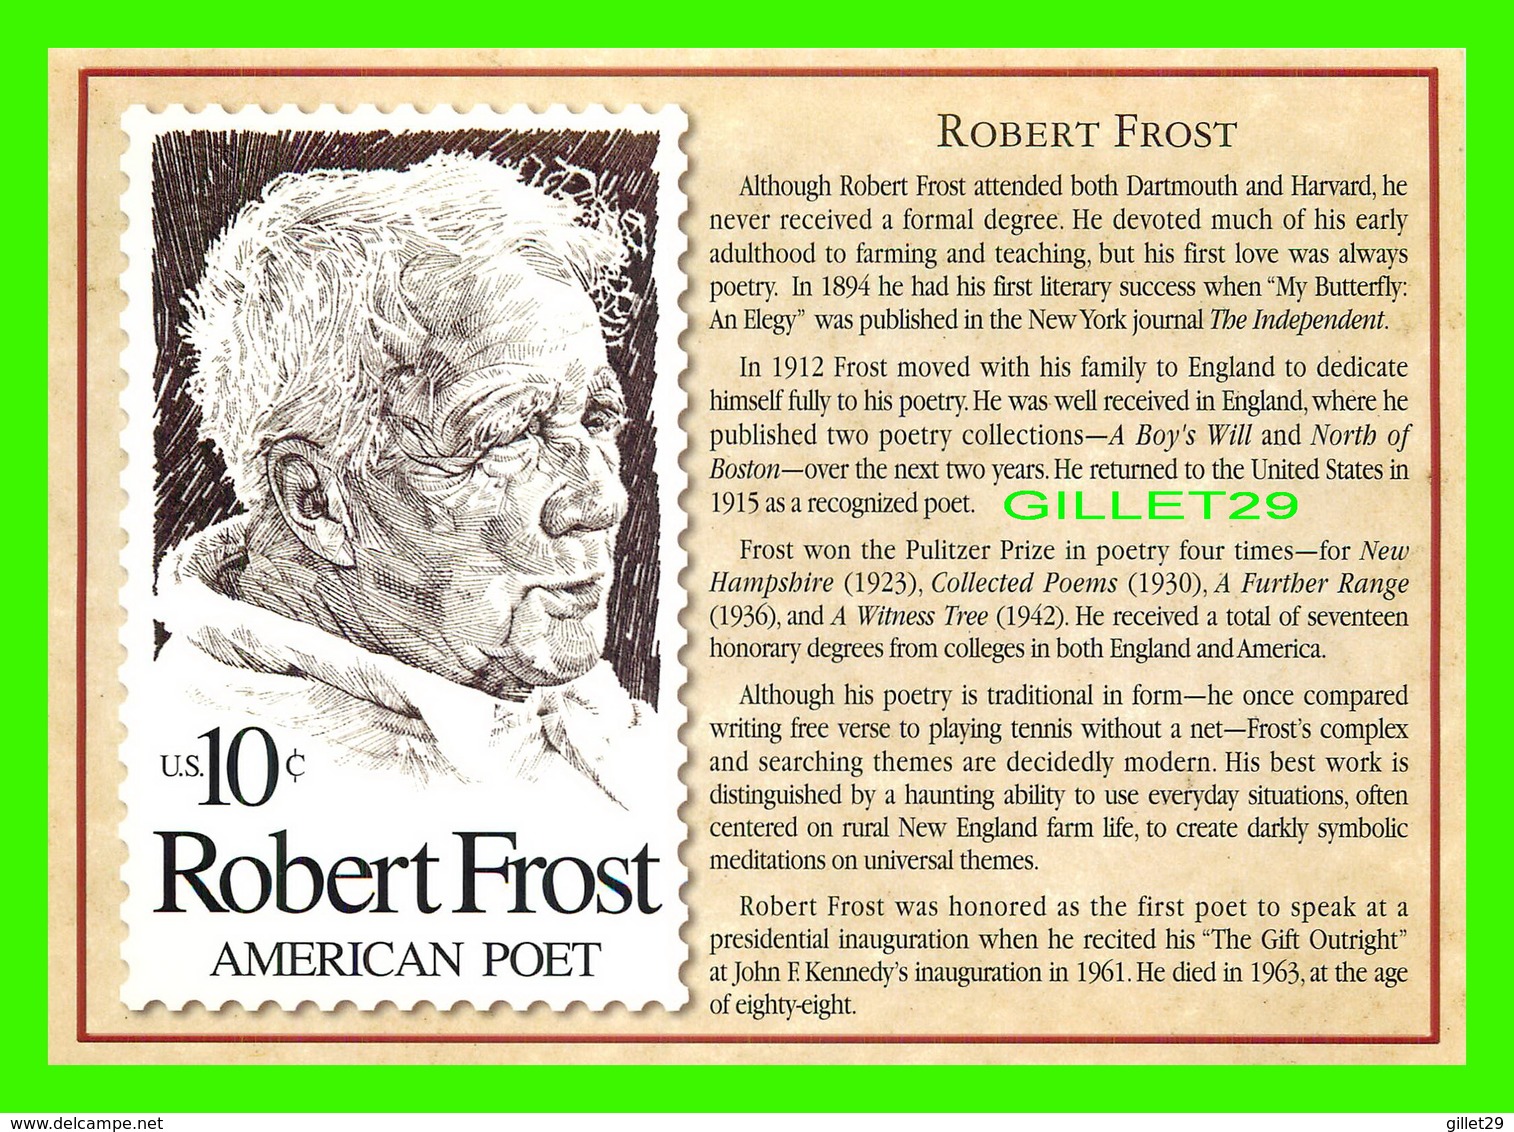 TIMBRES REPRÉSENTATIOINS - GREAT AMERICAN WRITERS, ROBERT FROST (1874-1963) - STAMP ISSUE DATE,1974 - - Timbres (représentations)